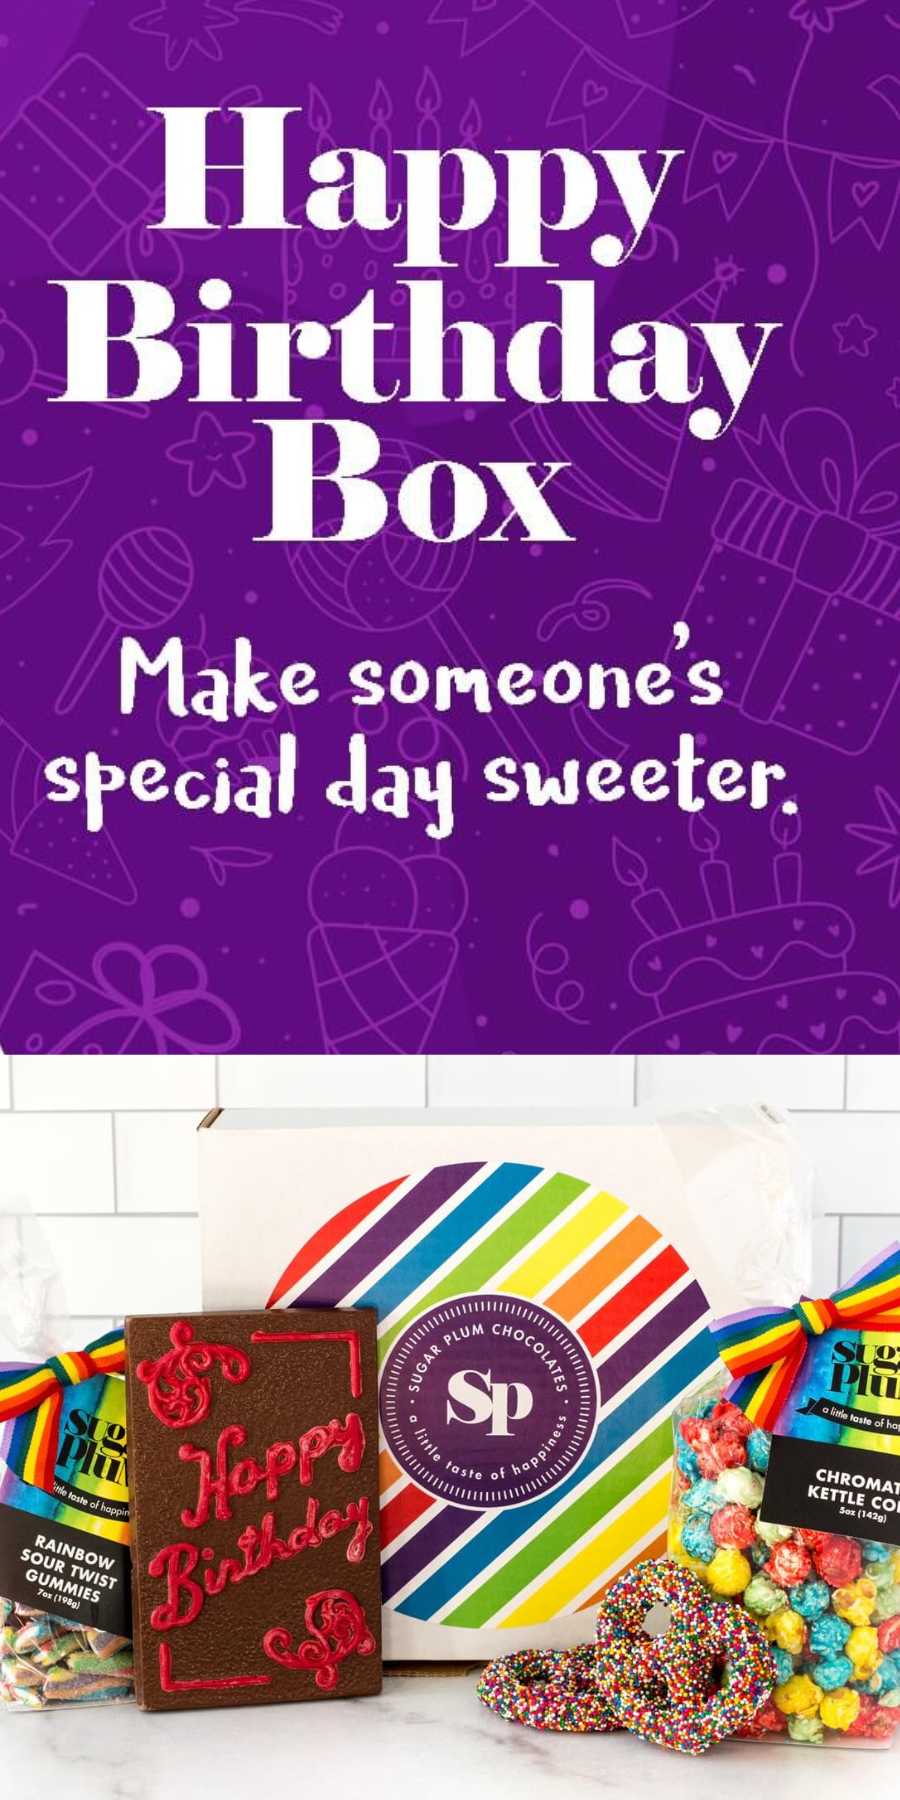 Happy birthday box. Make someone's special day sweeter.